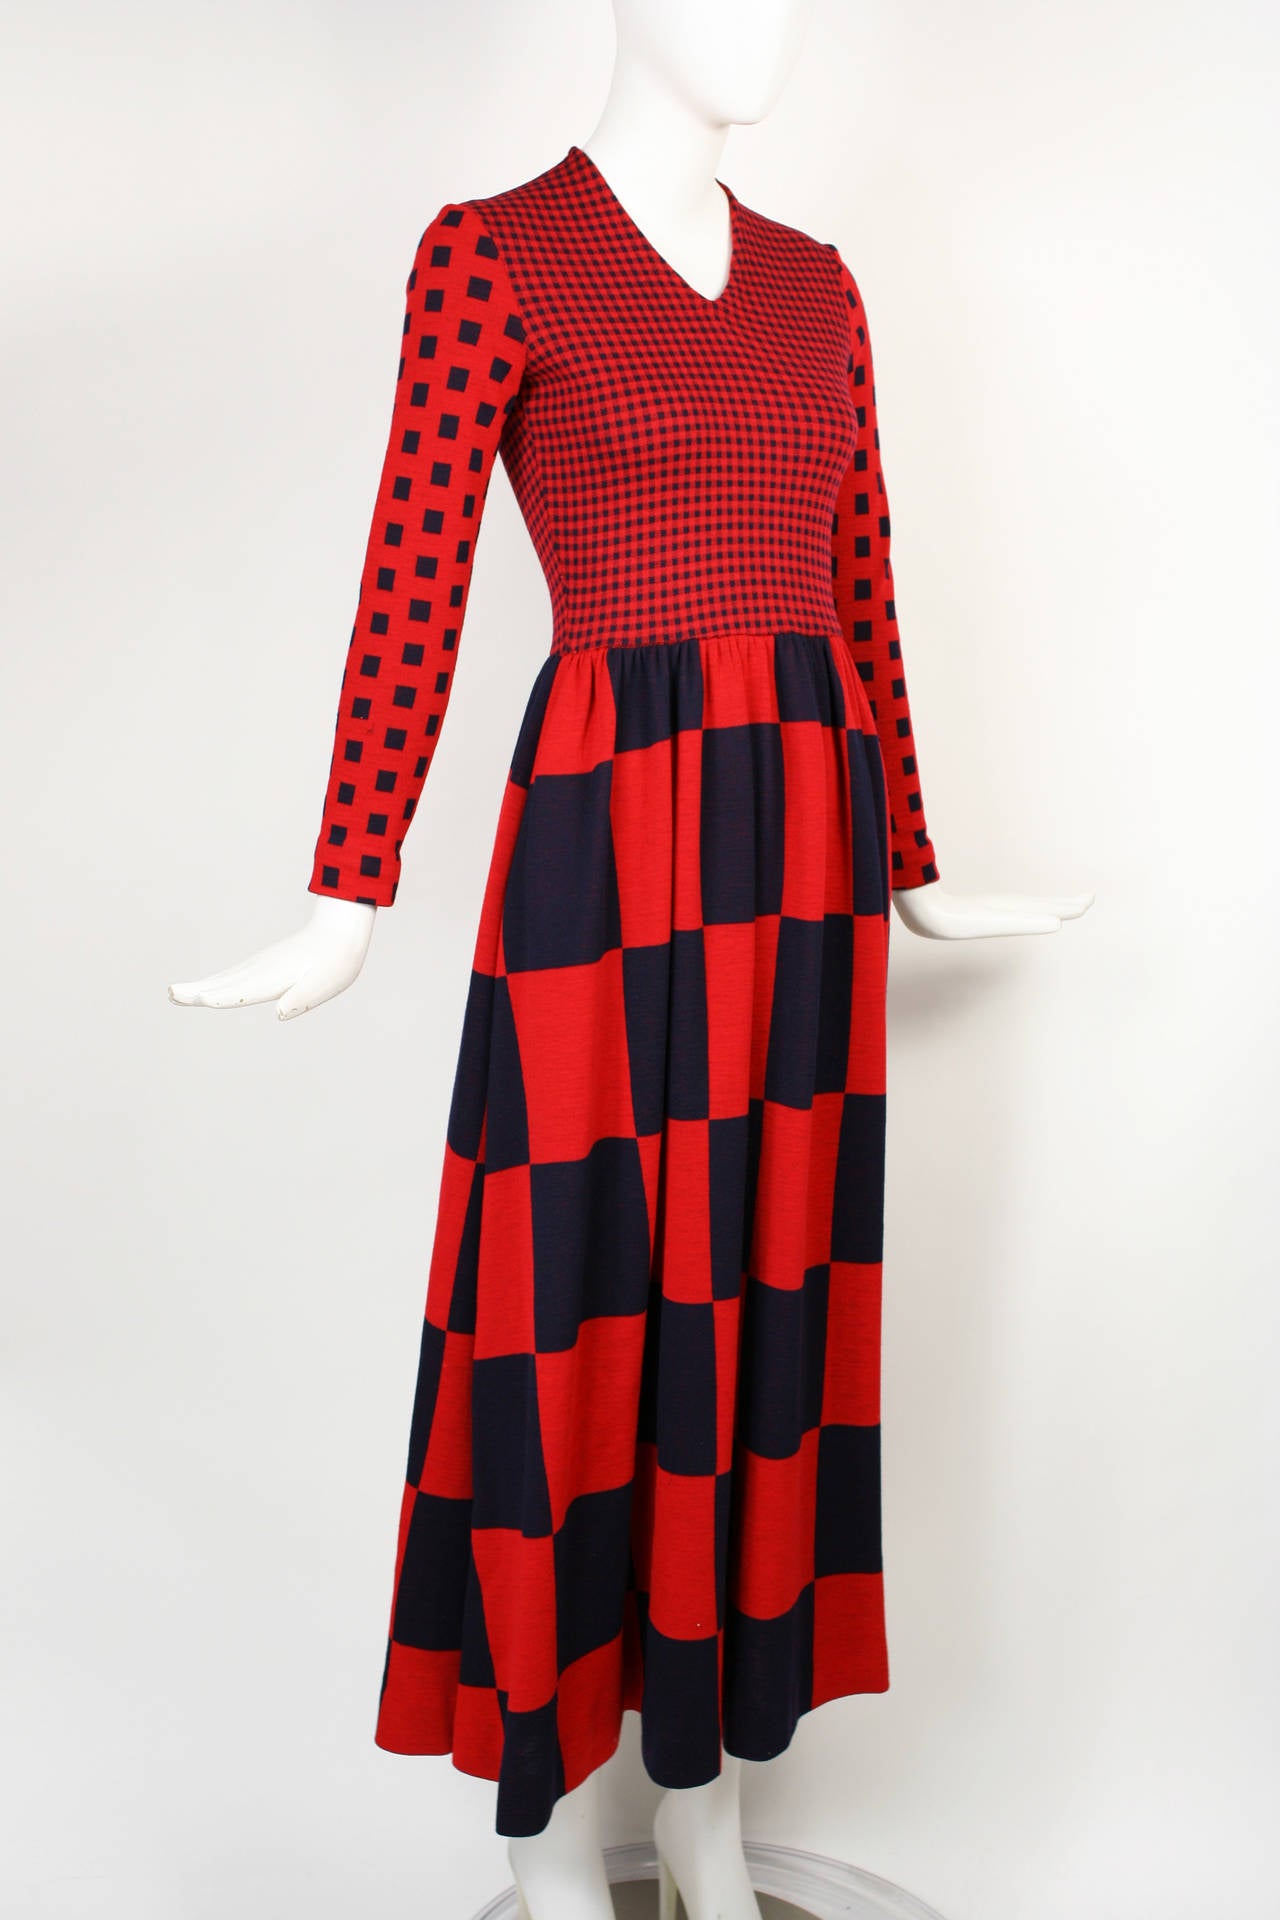 Iconic vintage 70s maxi dress from designer Rudi Gernreich. Made of stretch wool. Op-art check print of varying sizes in red and a deep dark blue that is almost black. Fitted bodice has high v-neck and long fitted sleeves. Full-length skirt is